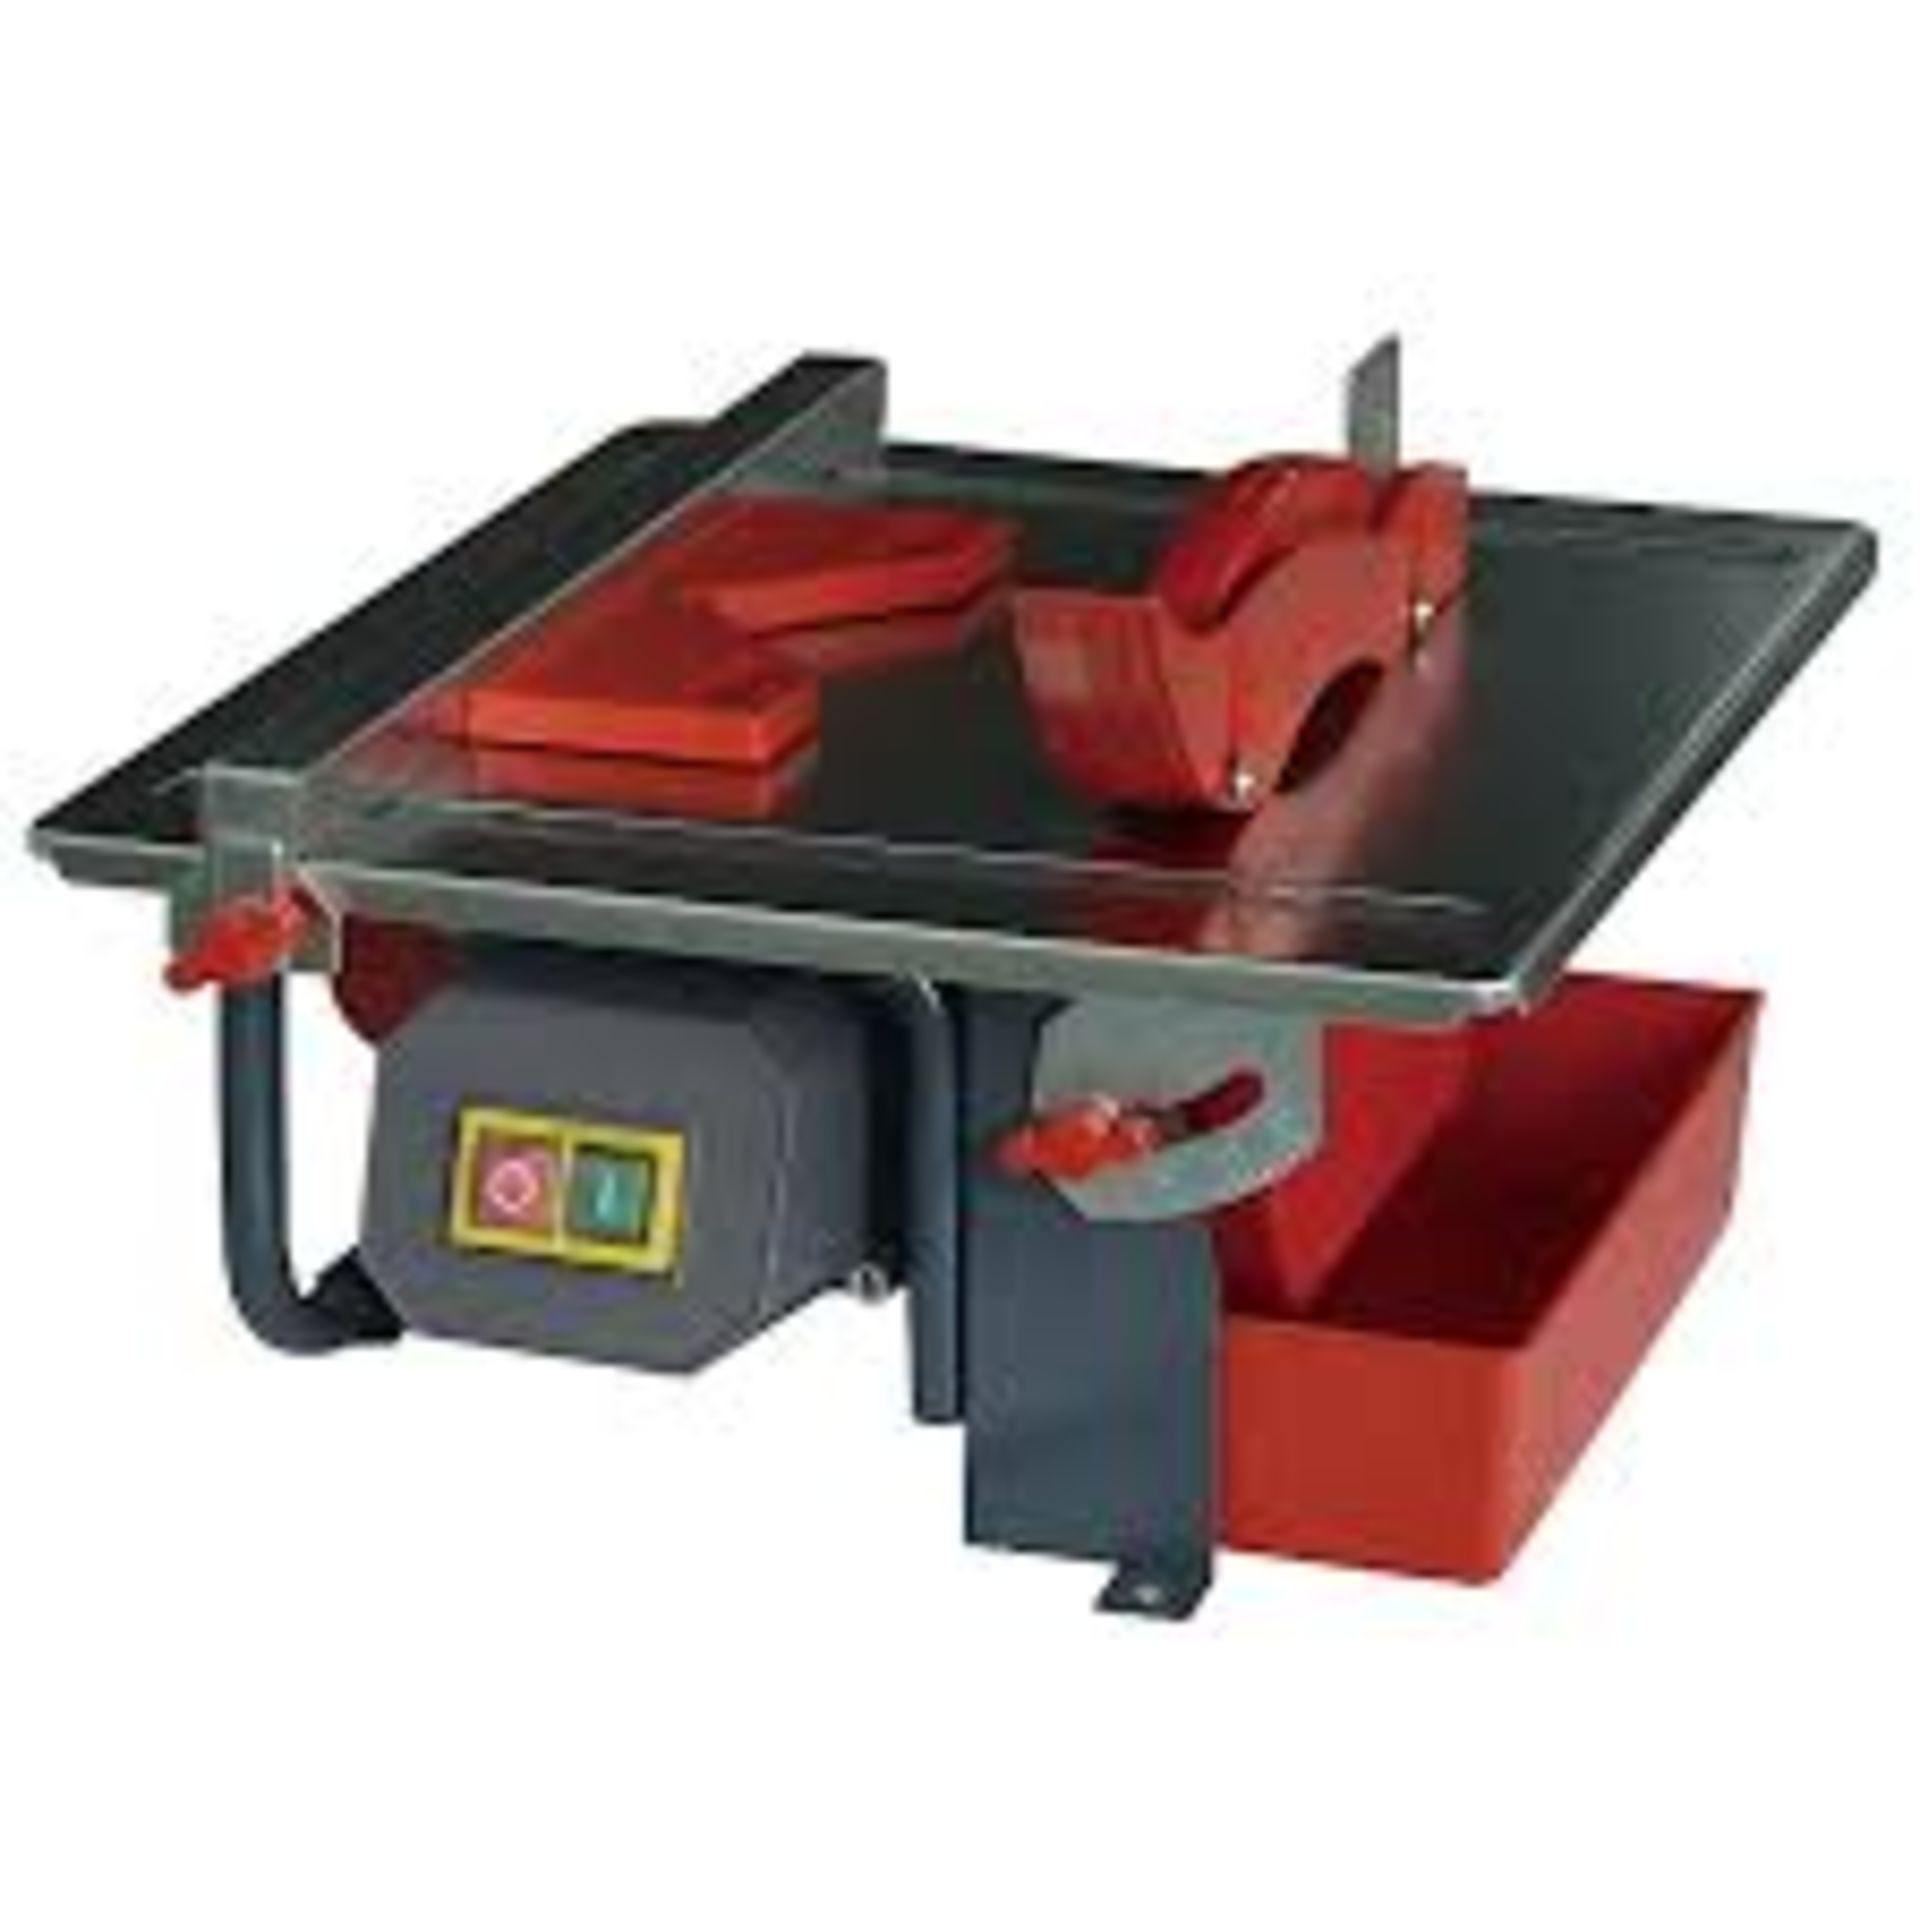 Performance Power 450W 230-240V Corded Tile cutter PTC450E. - PW. Suitable for cutting various